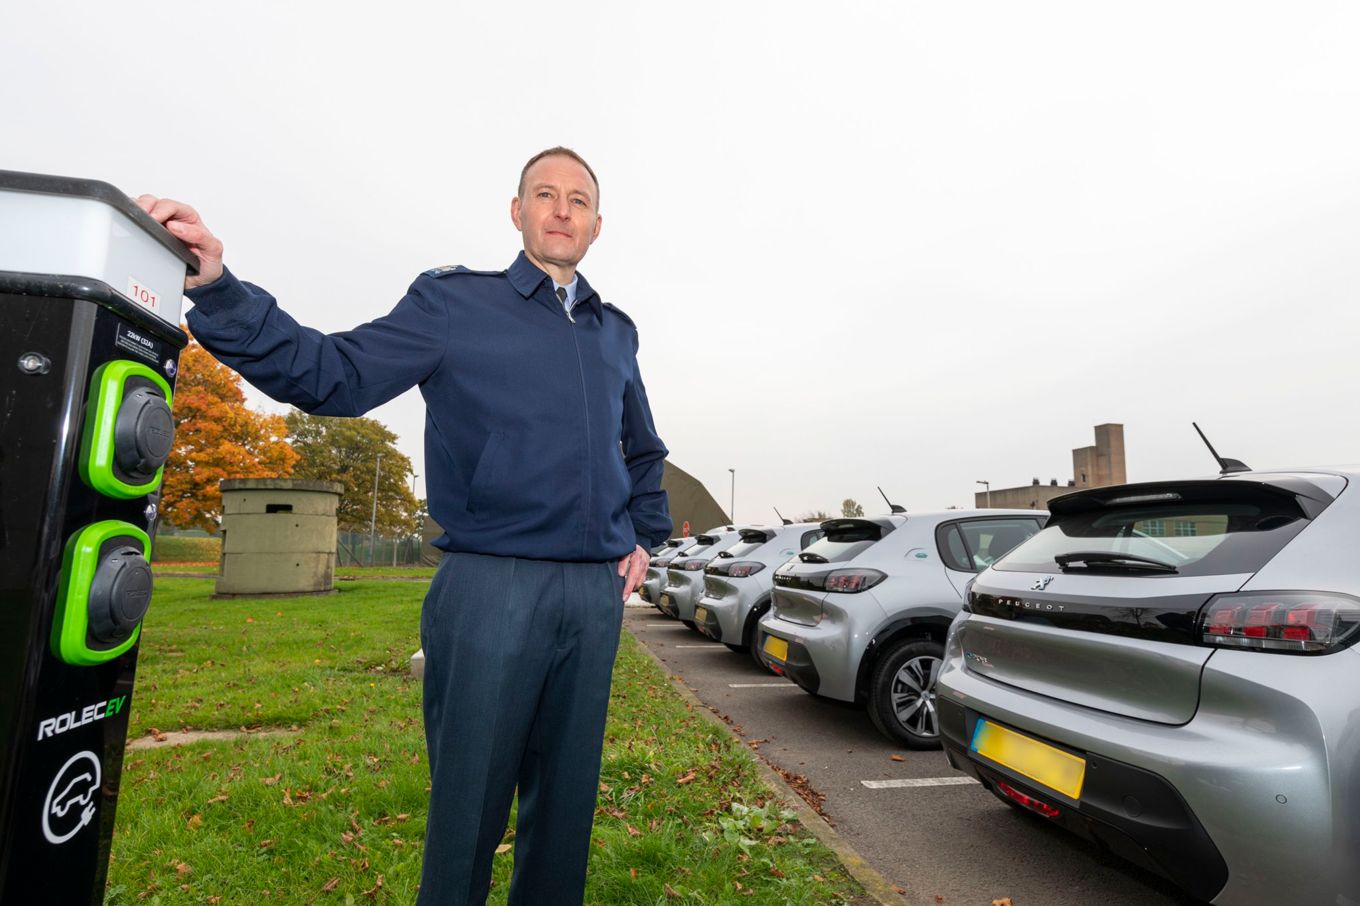 Image shows the Warrant Officer standing in front of the six new Peugeot e-208 electric vehicles at RAF Leeming while leaning on one of the new charging points.